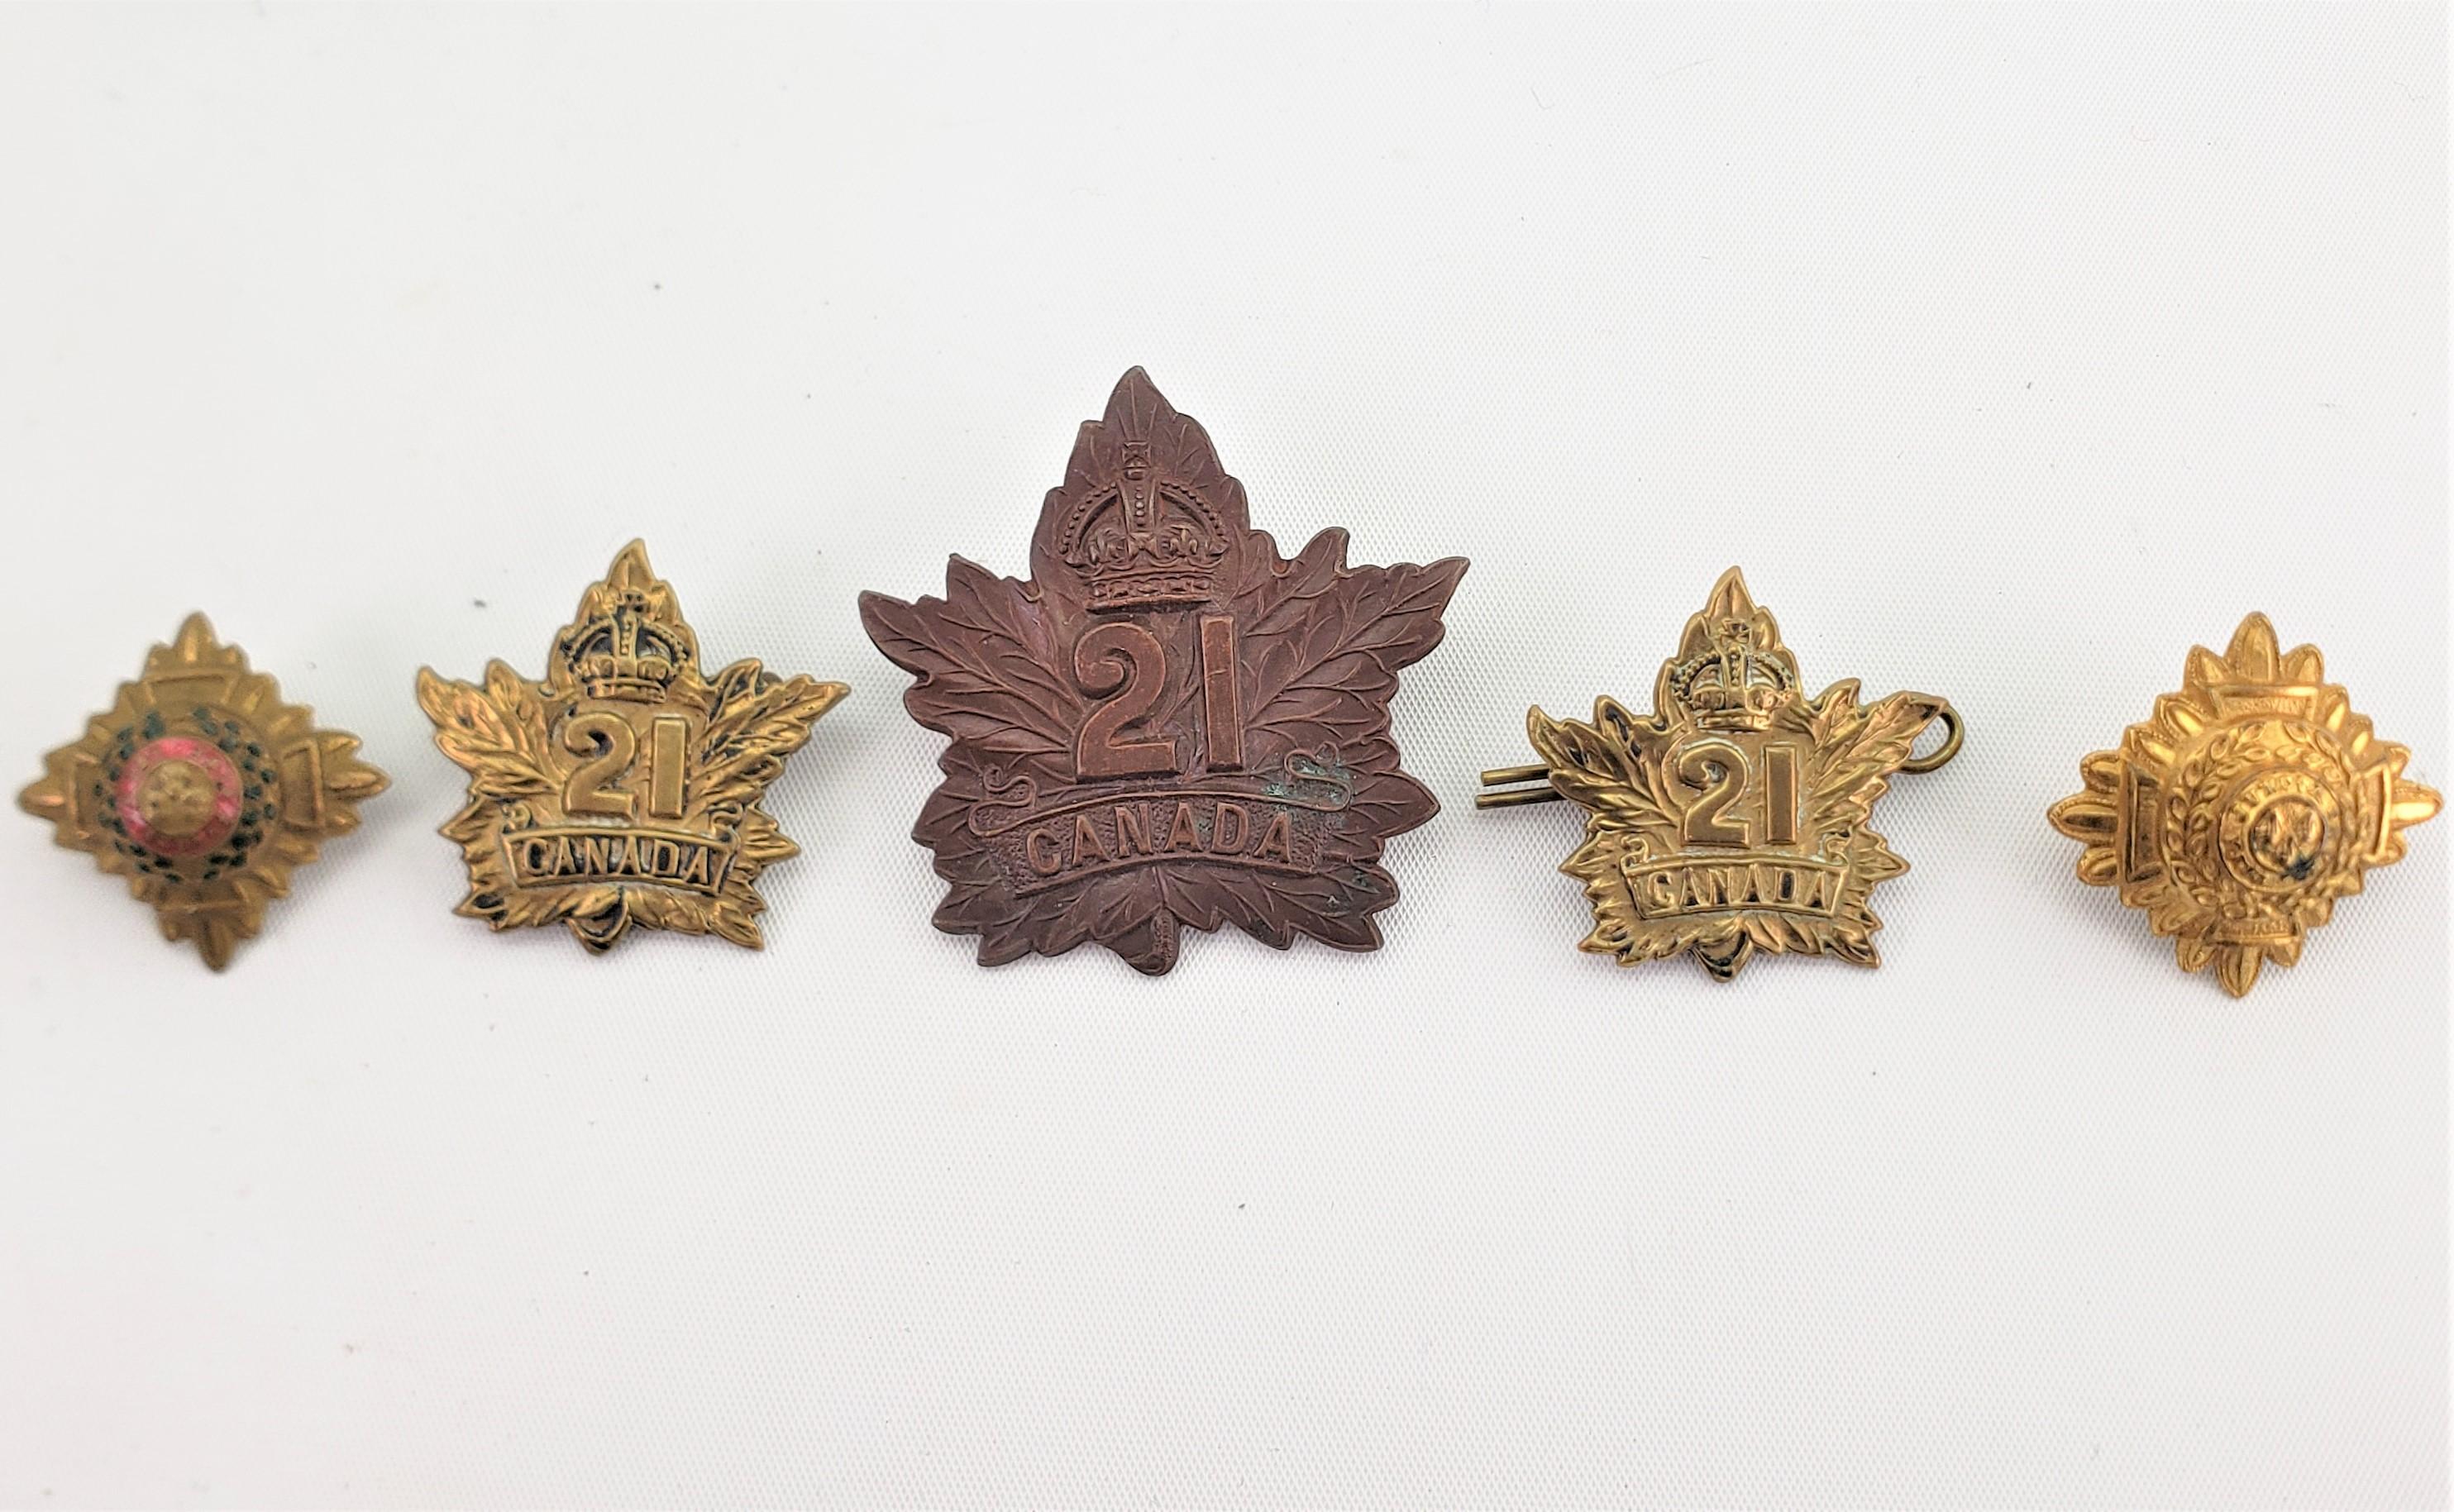 20th Century Canadian WW1 21st Regiment Soldier's Uniform Buttons, Badges & Medals Grouping For Sale